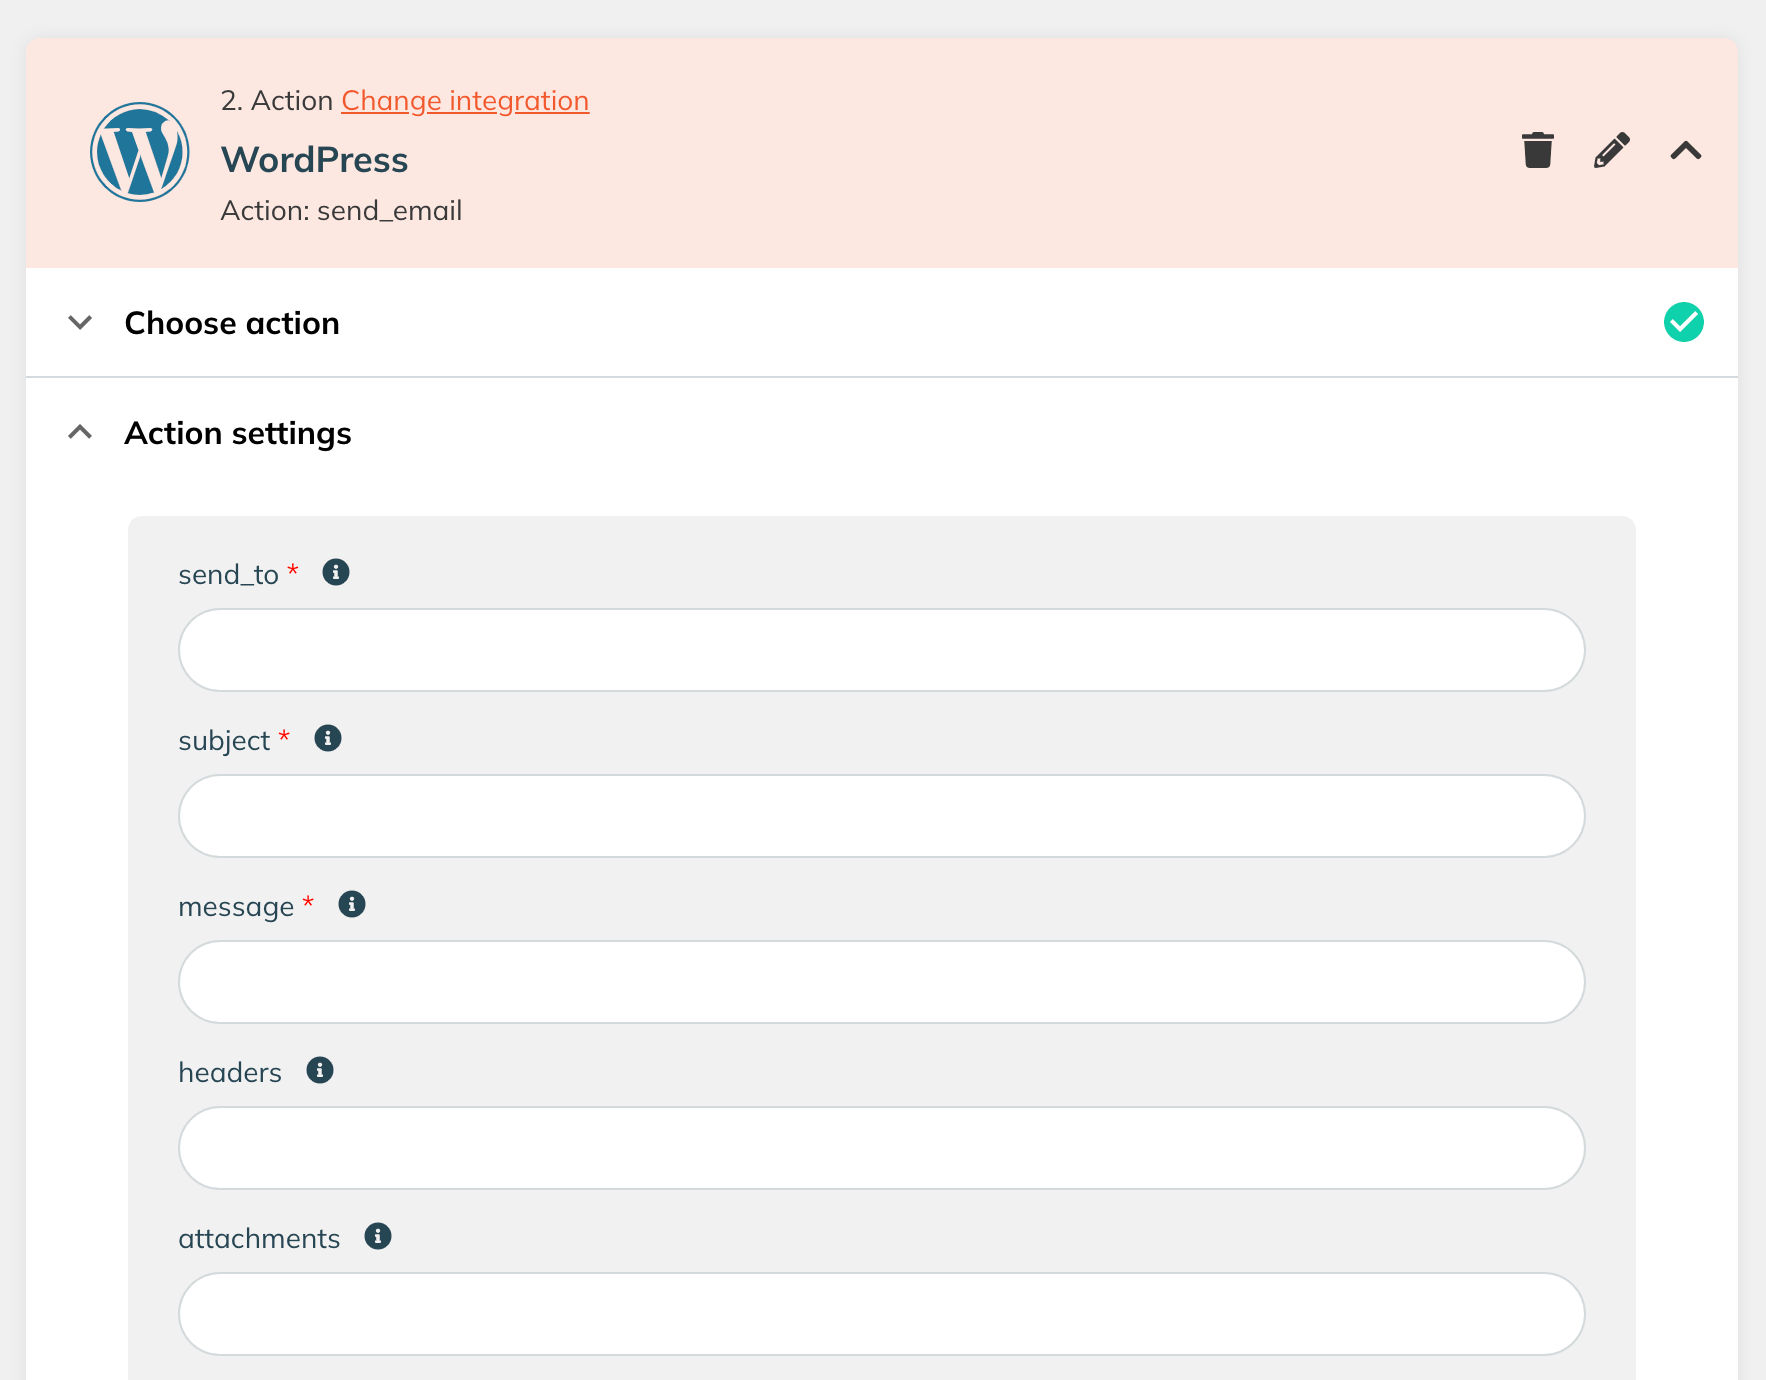 The Action Settings within the WP Webhooks Flow feature